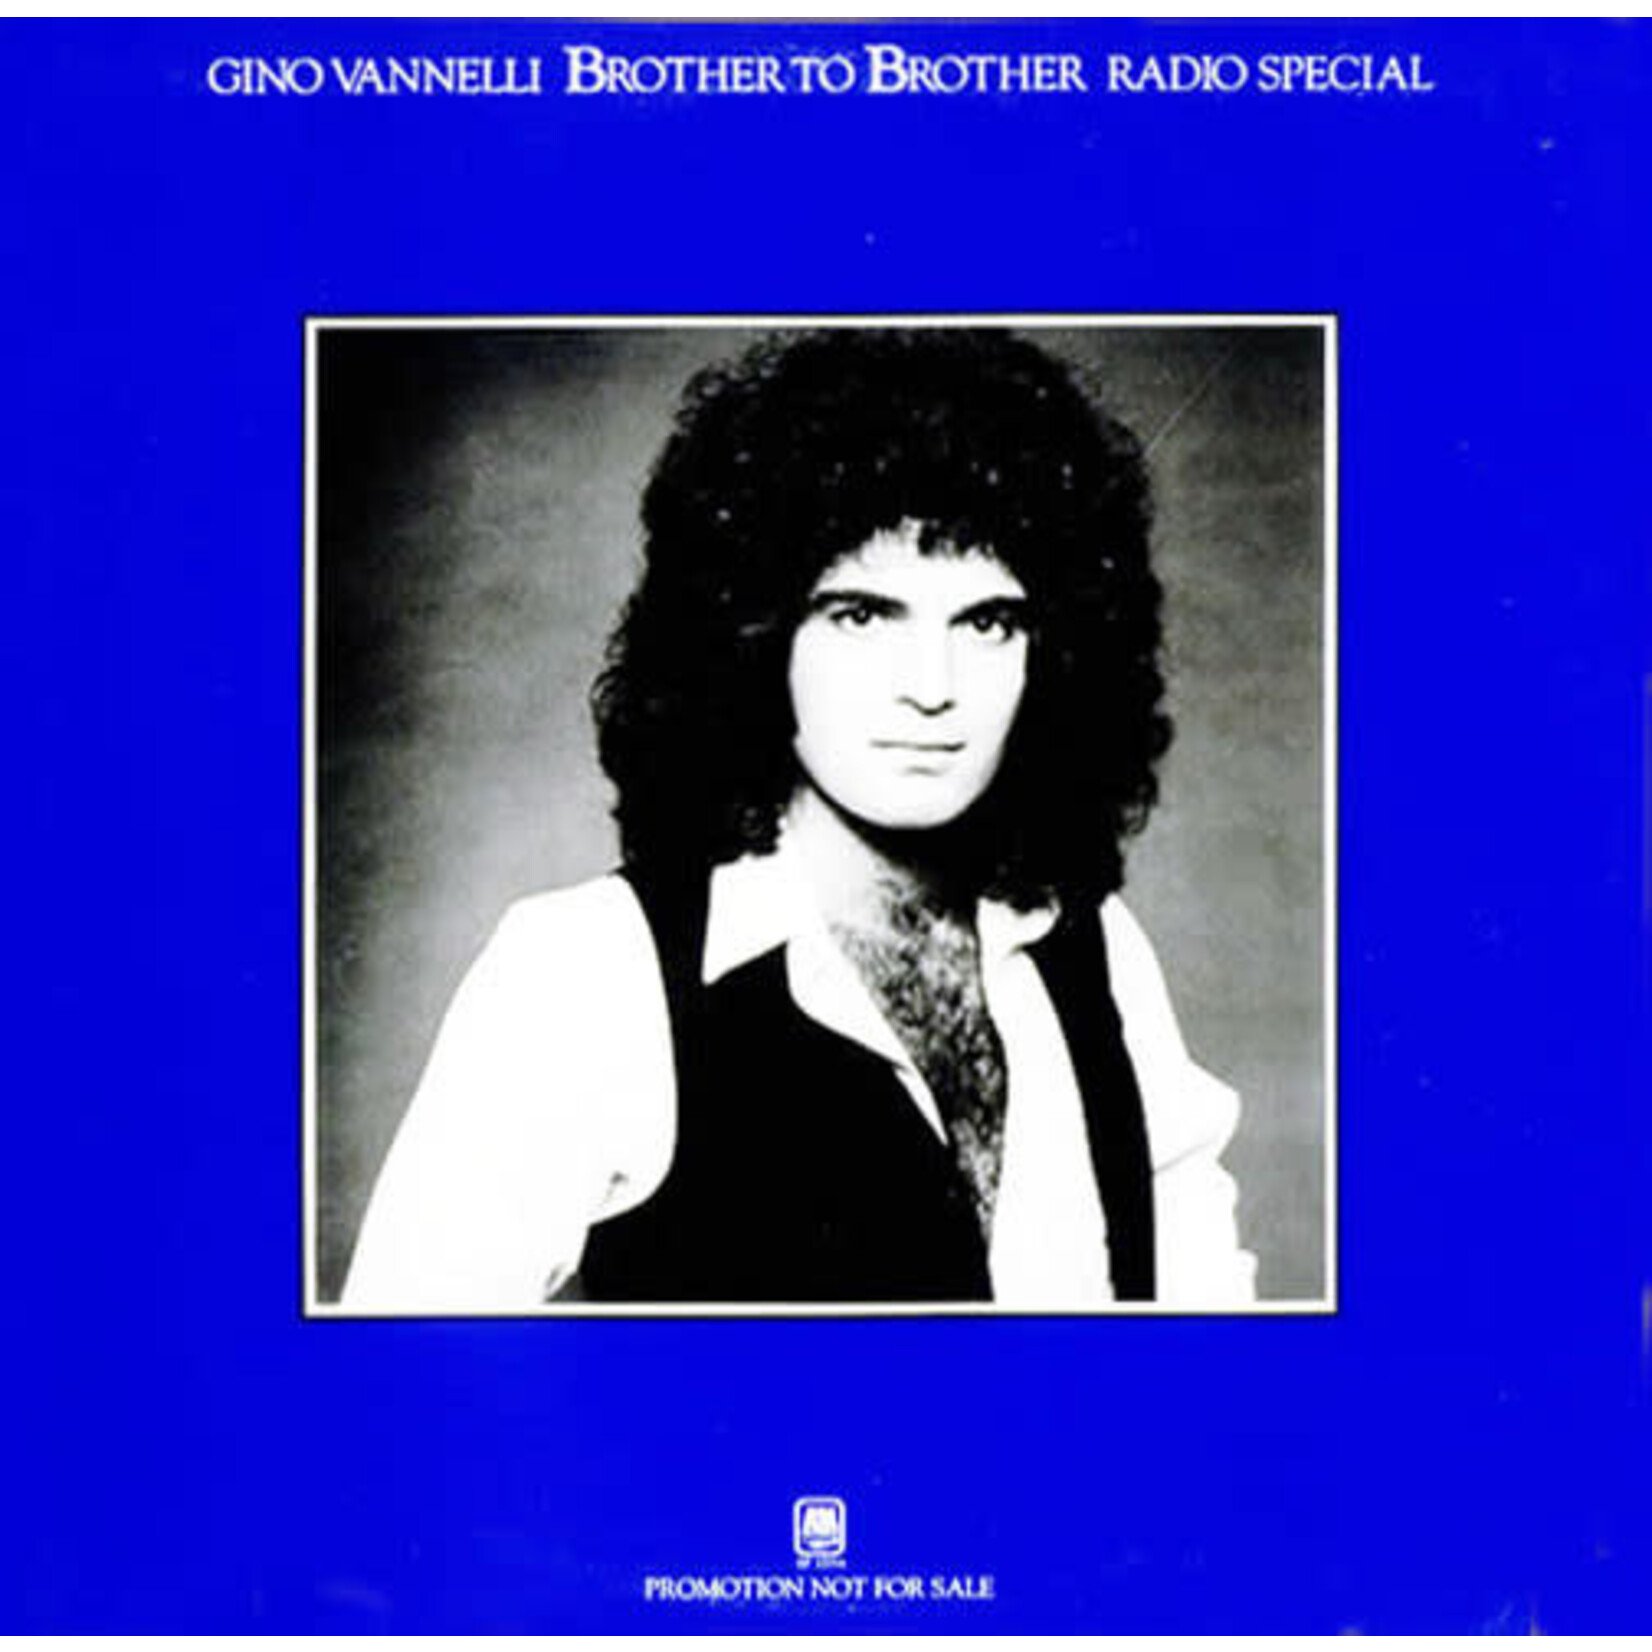 Gino Vannelli Gino Vannelli – Brother To Brother Radio Special (VG, 1978, LP, A&M Records – SP-17054)